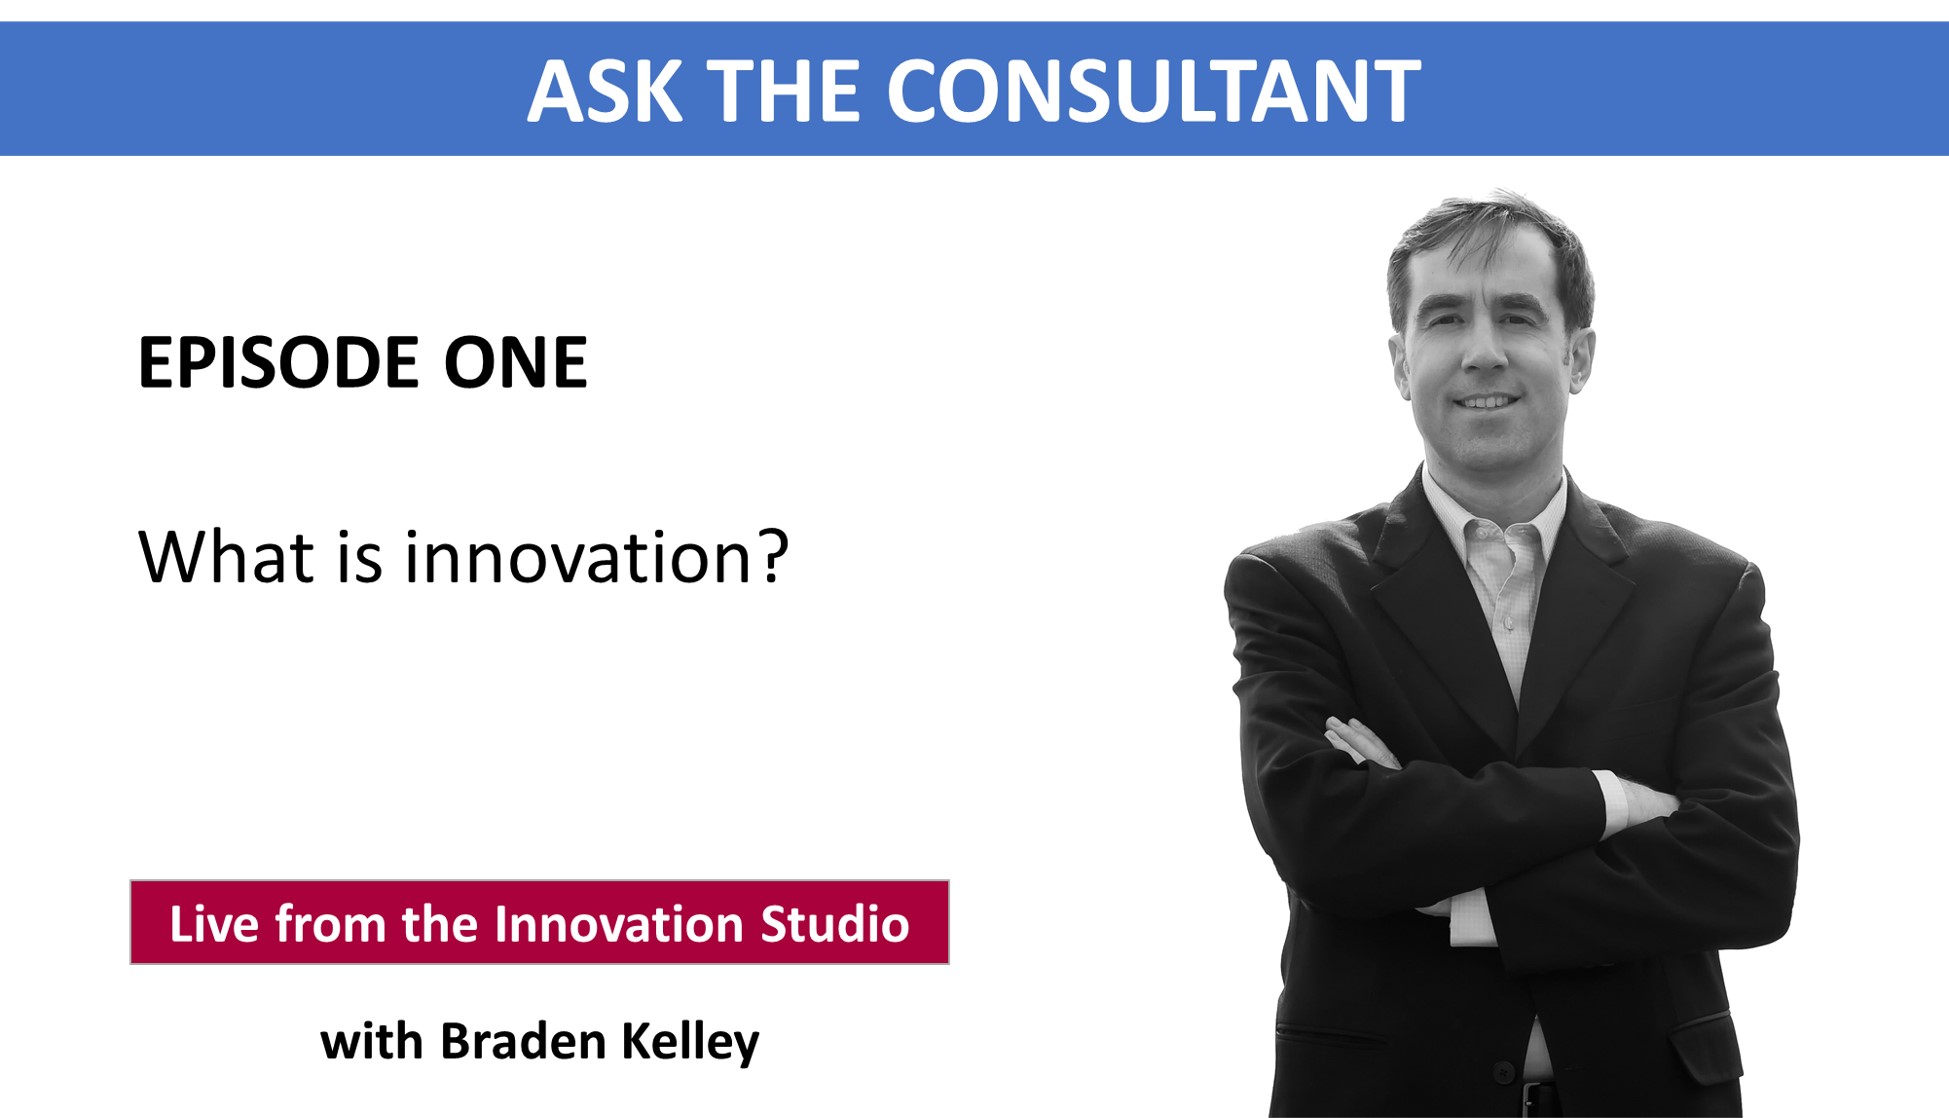 Ask the Consultant Episode 1